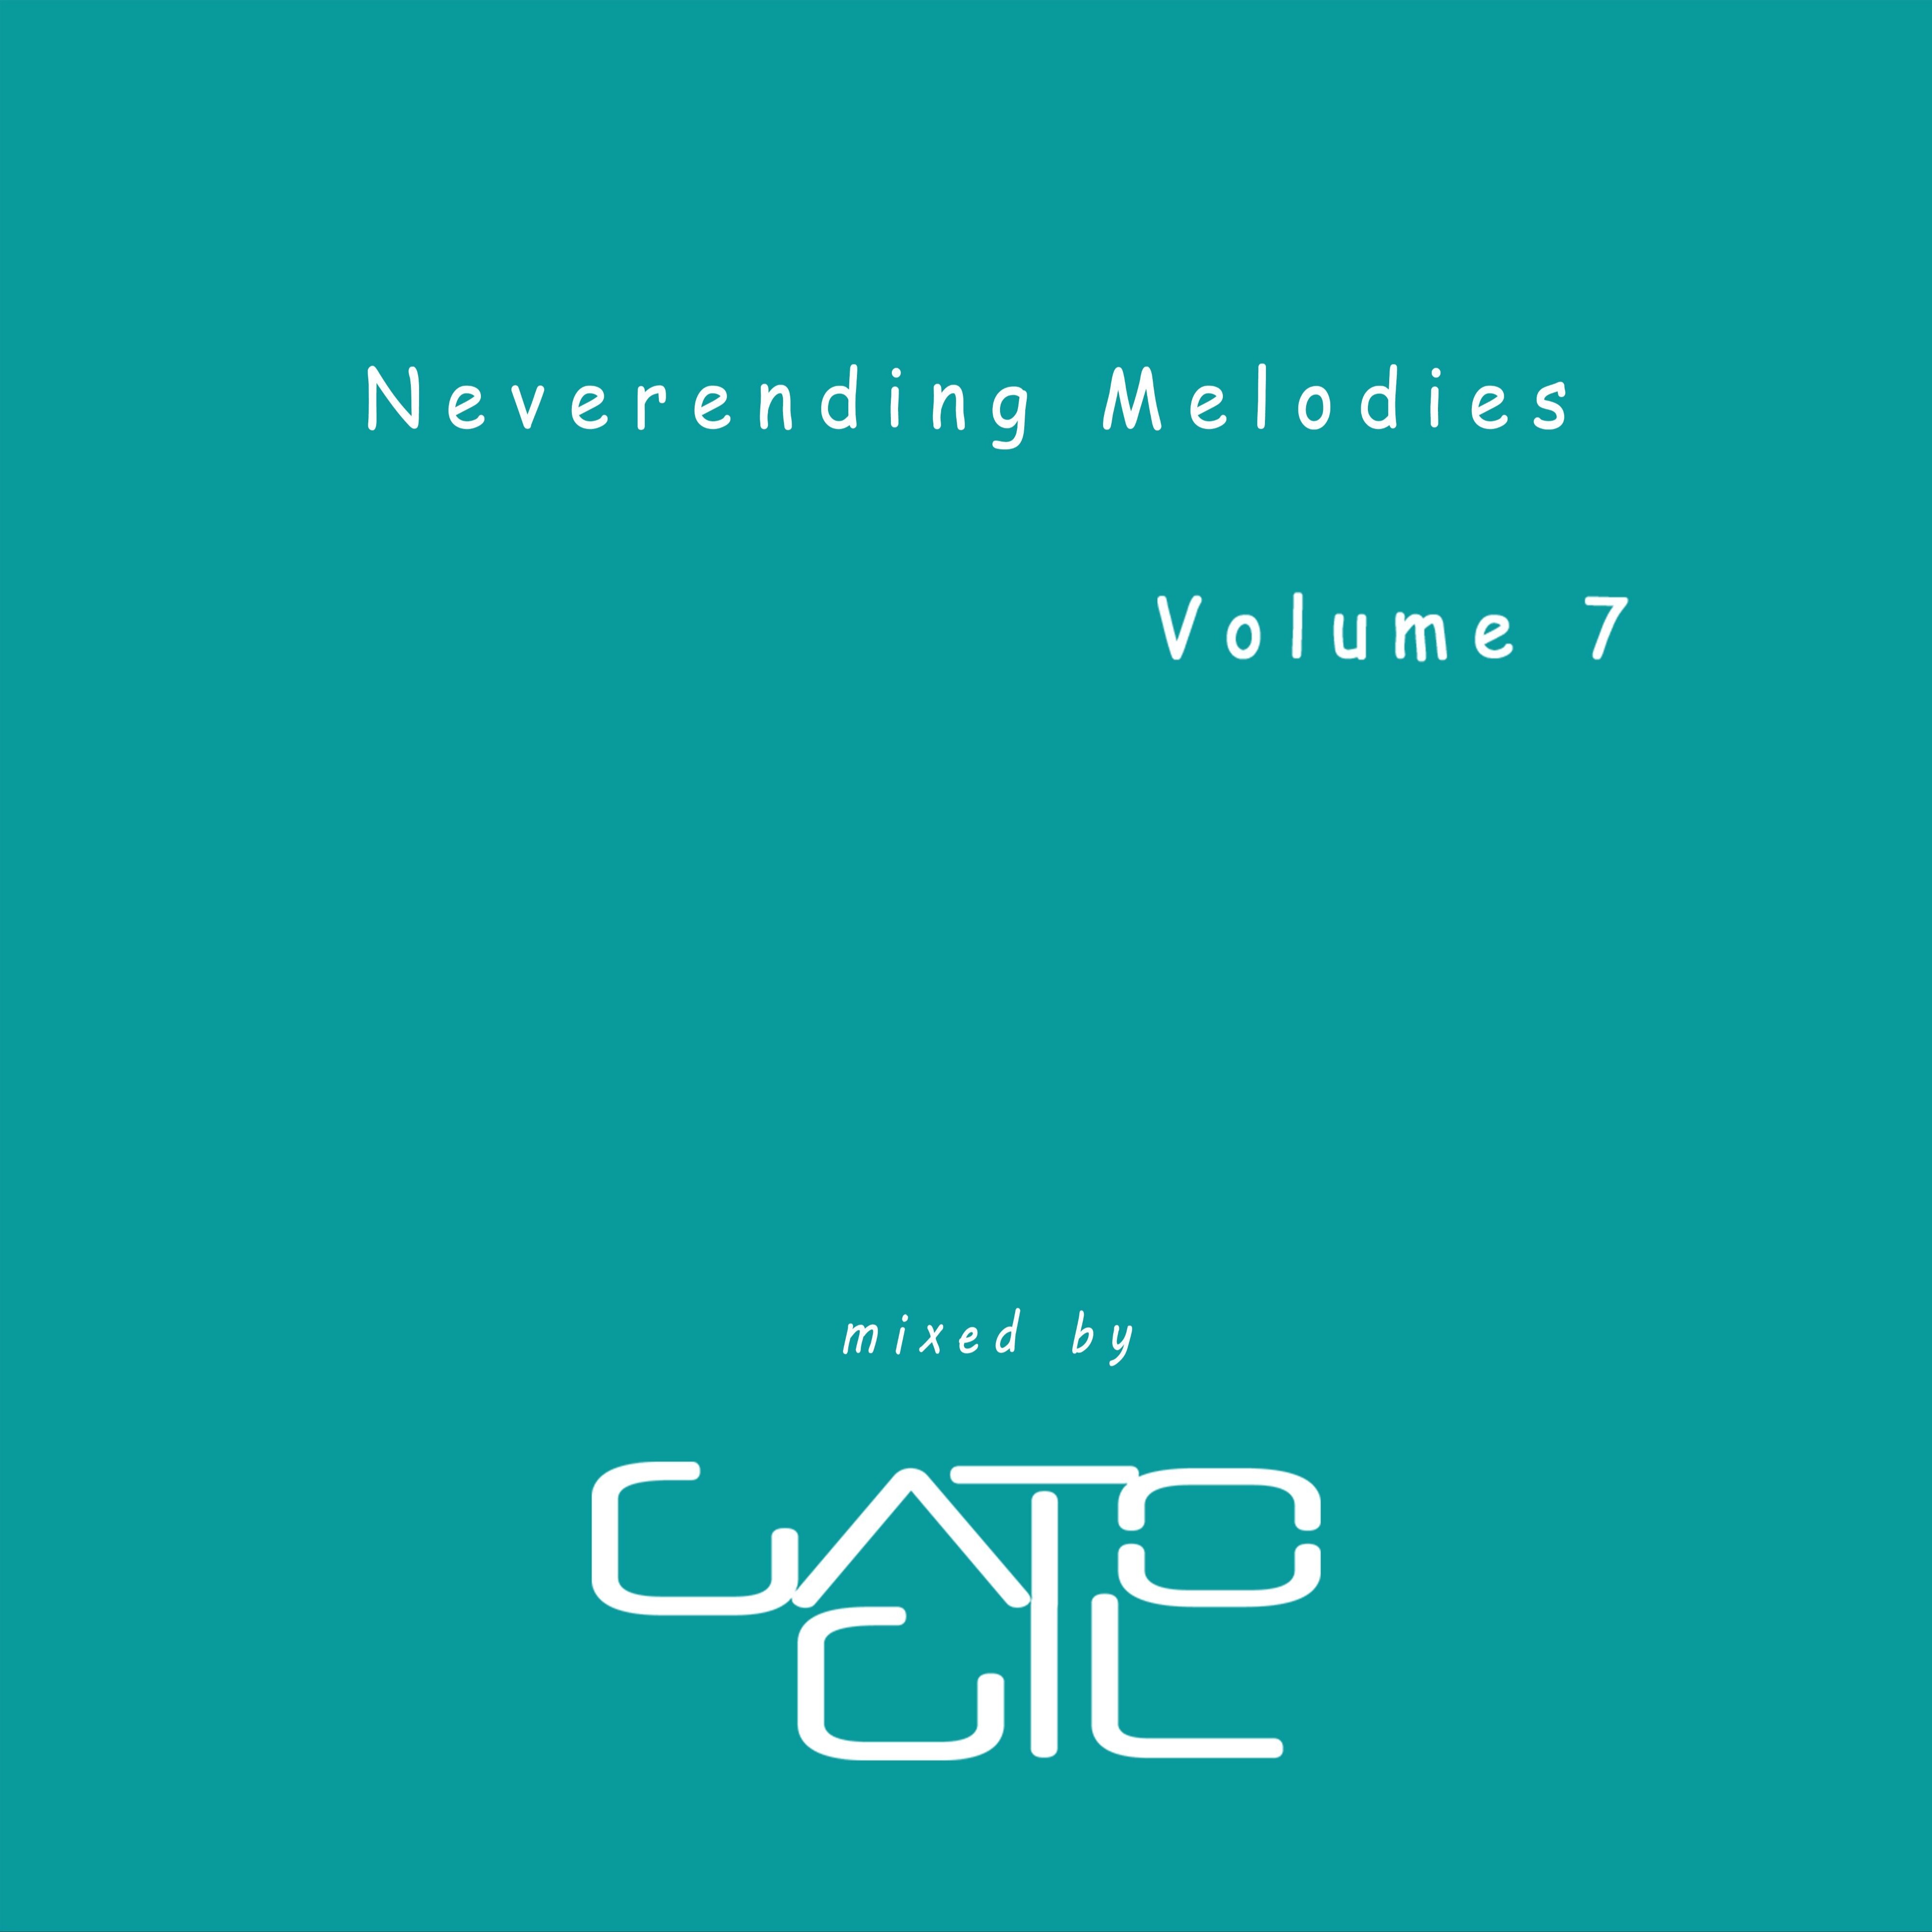 Neverending_Melodies_Vol_7_Mixed_by_Gato_Gil_...